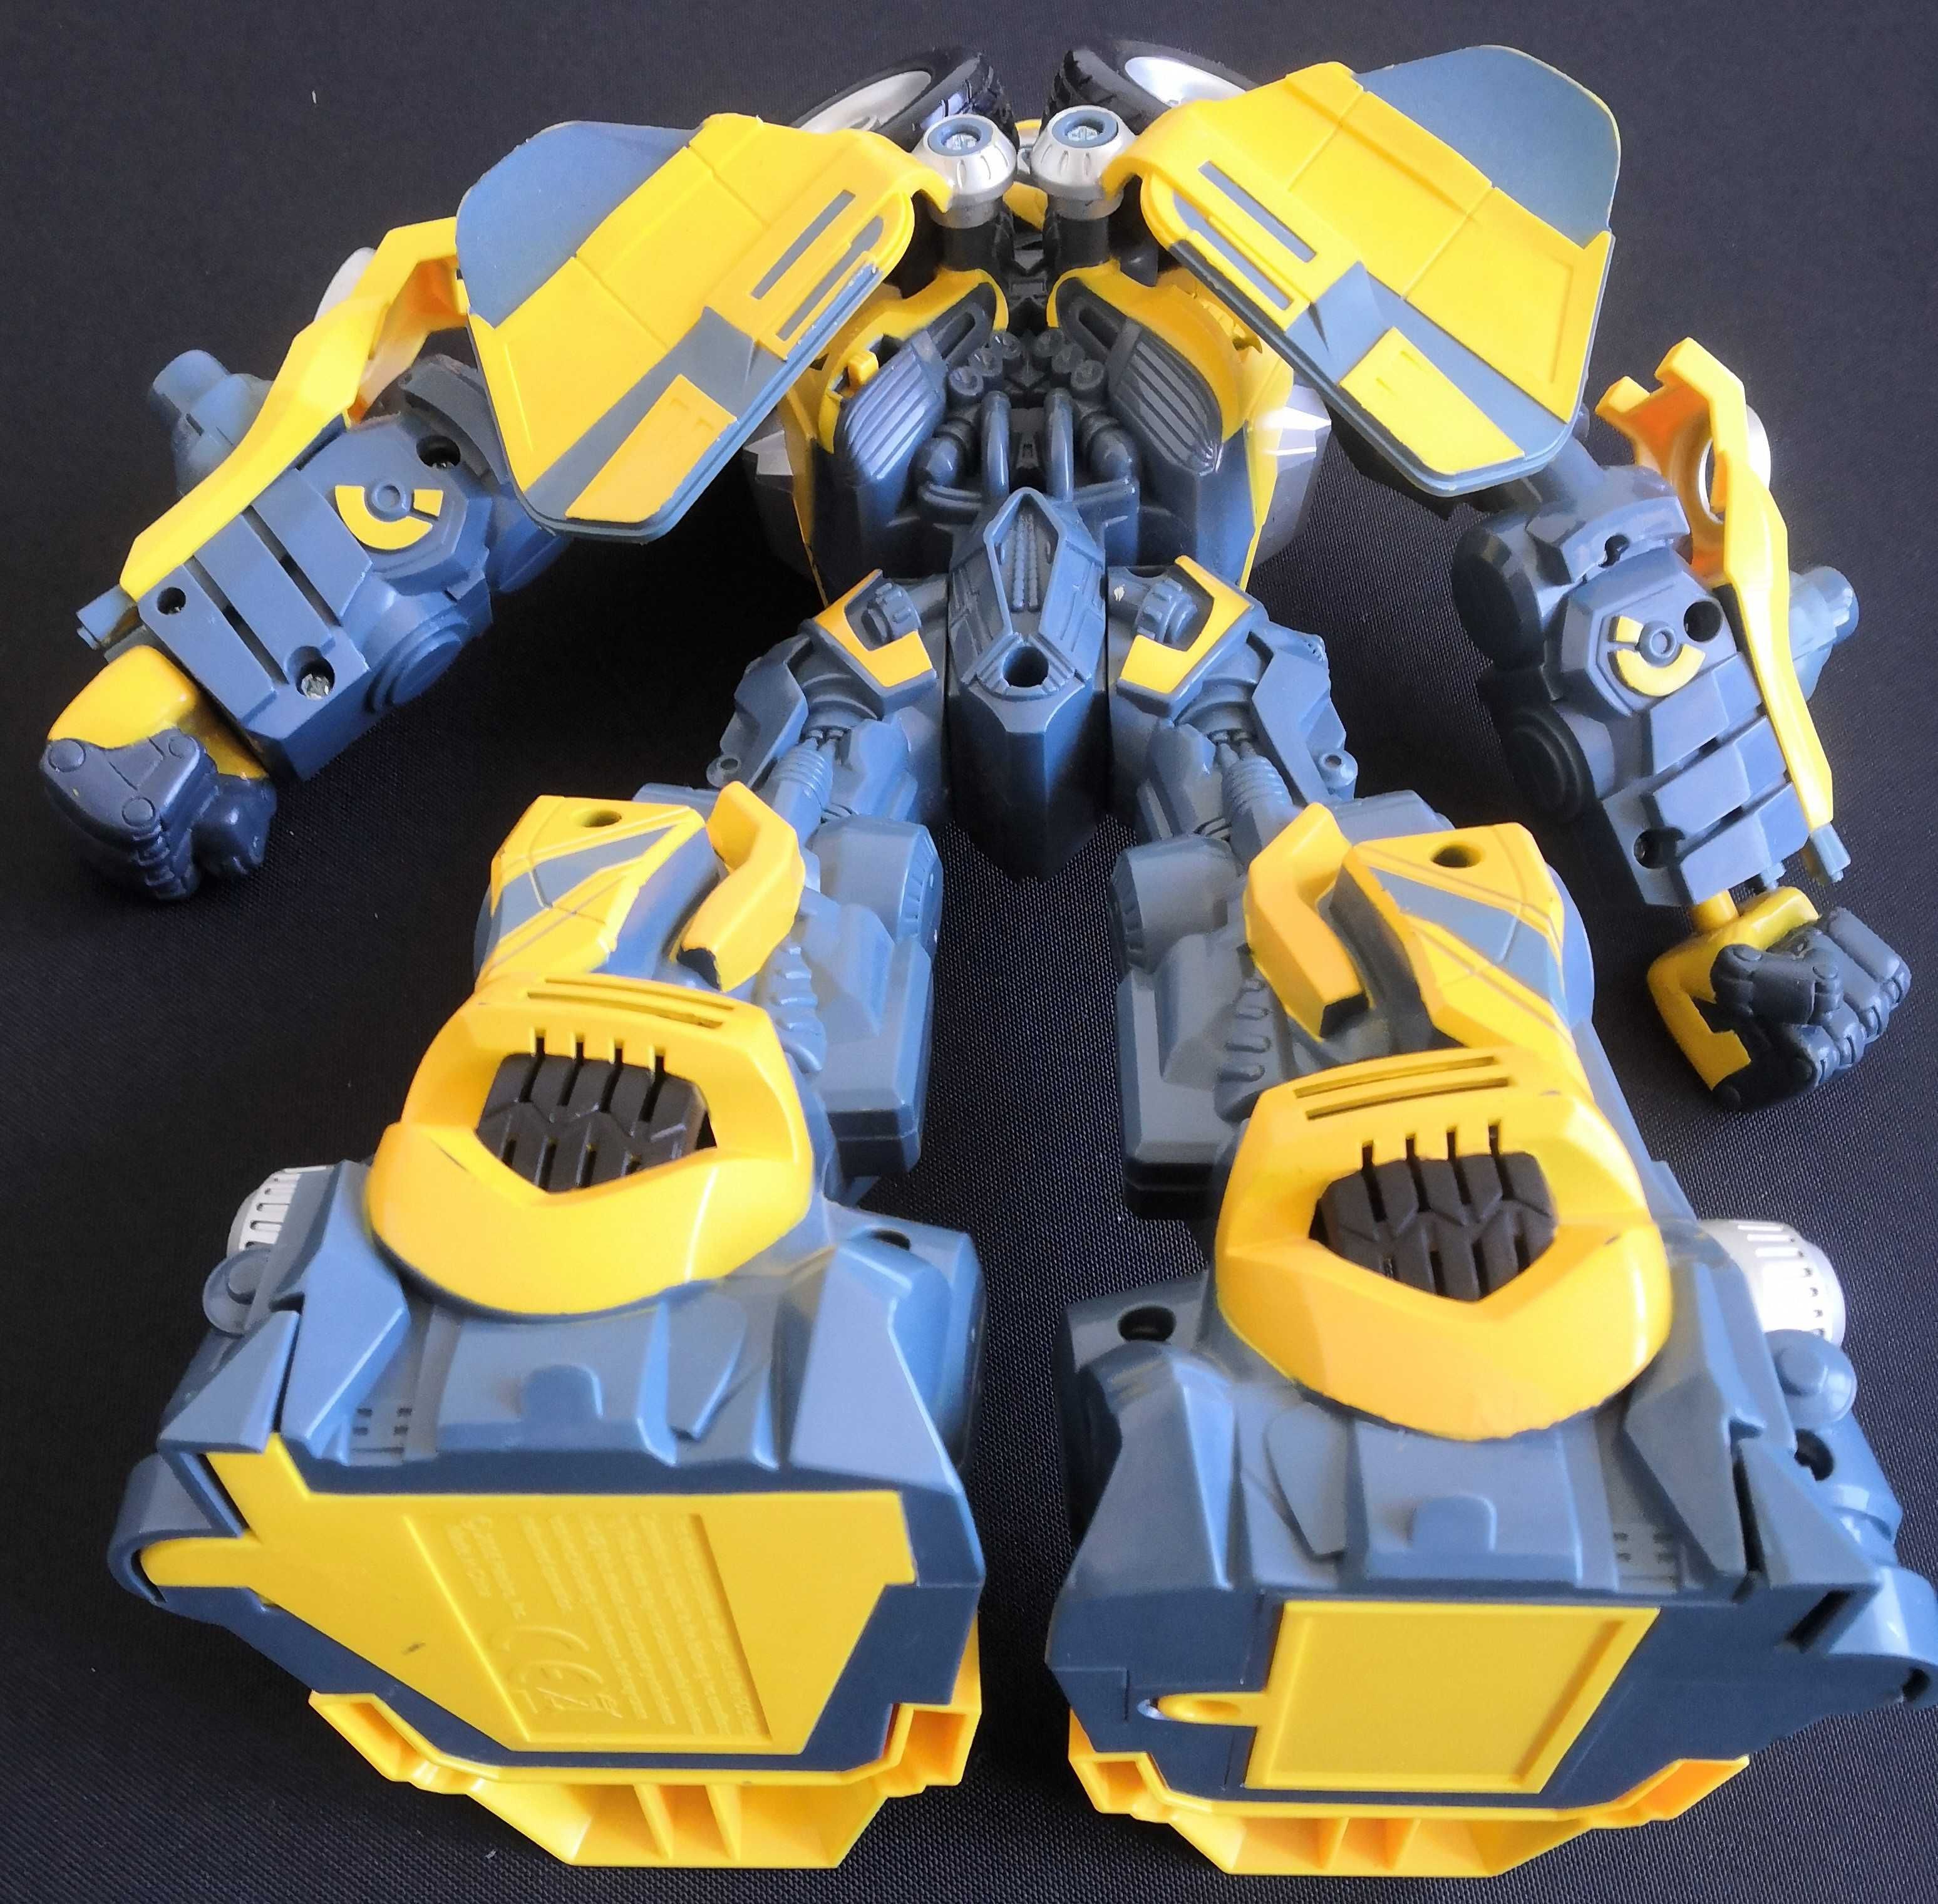 Transformers Cyber Stompin' Bumblebee Action Figure firmy Hasbro